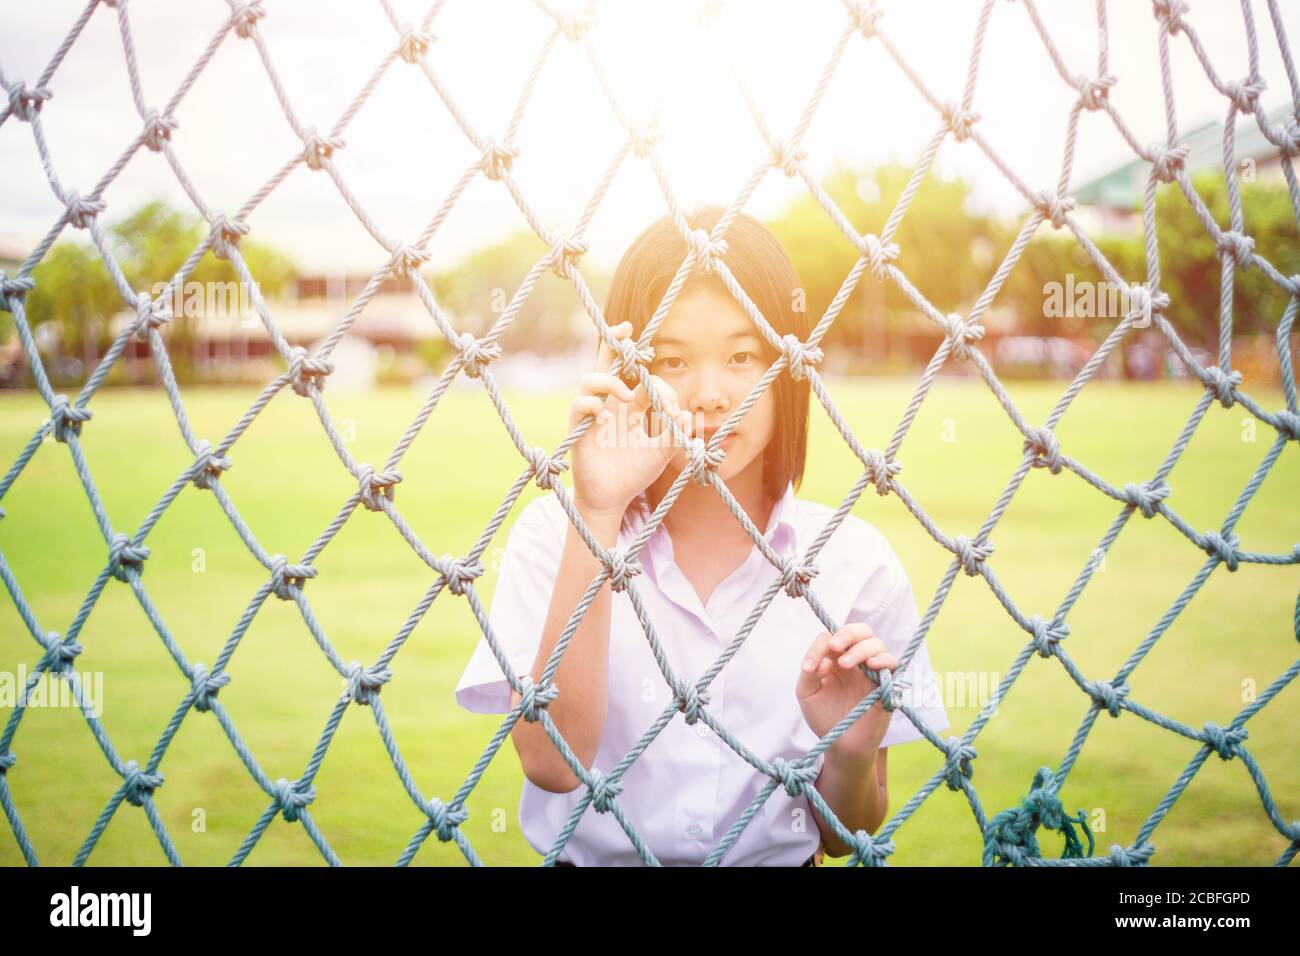 Cute portrait of innocent Asian girl teen student stand behind the rope net looking camera with sunshine Stock Photo